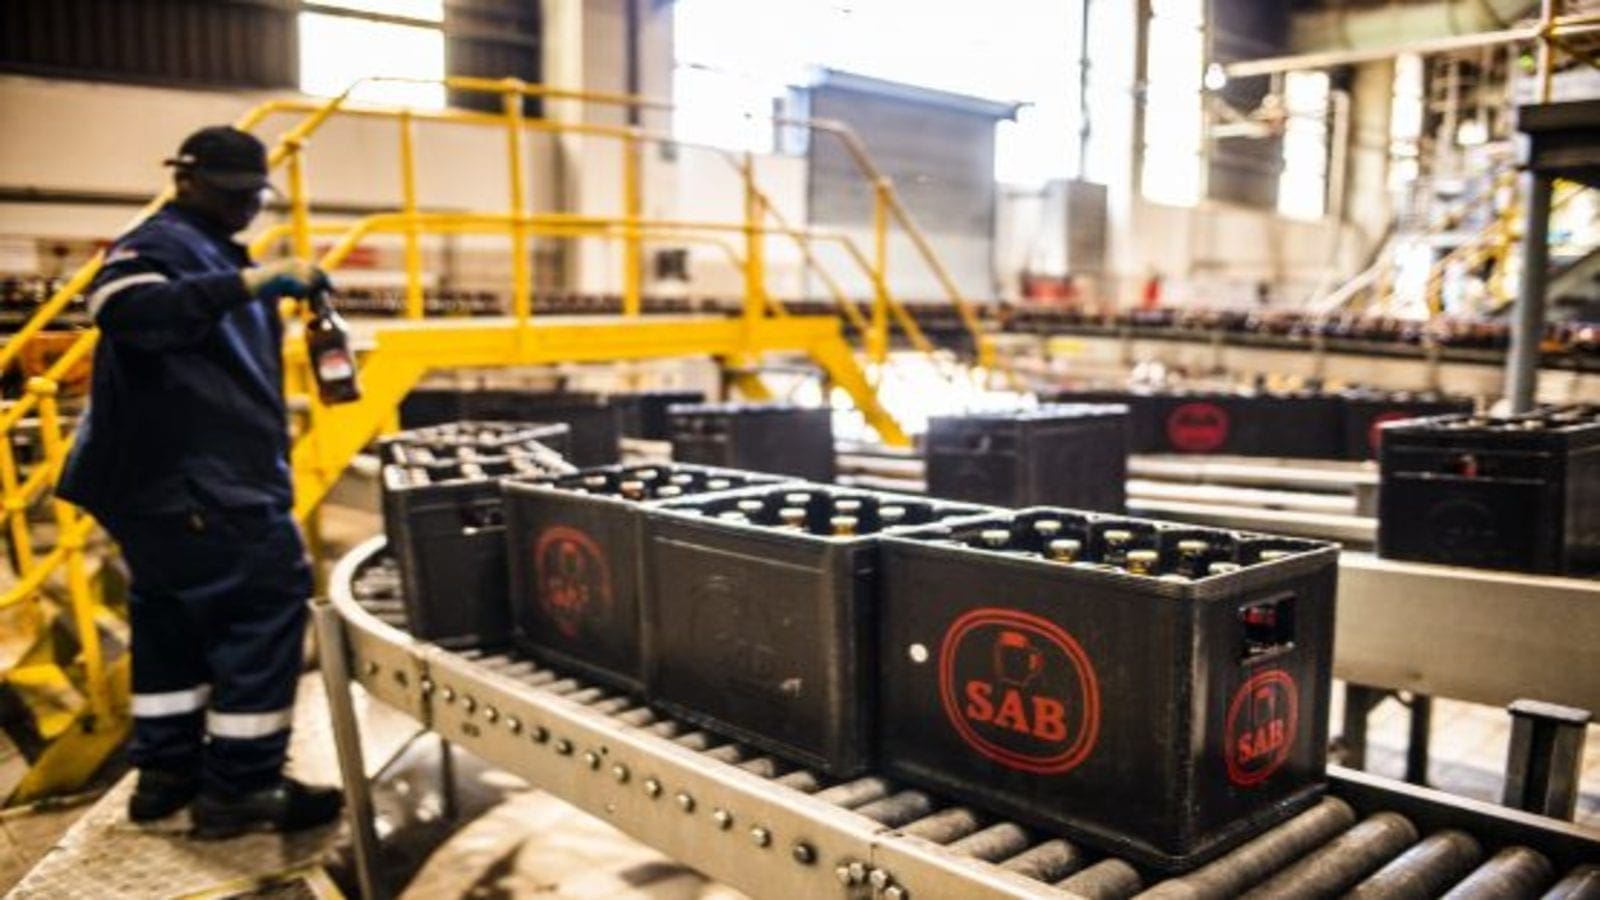 SAB stops beer production amid extended liquor sales ban, damages from unrest